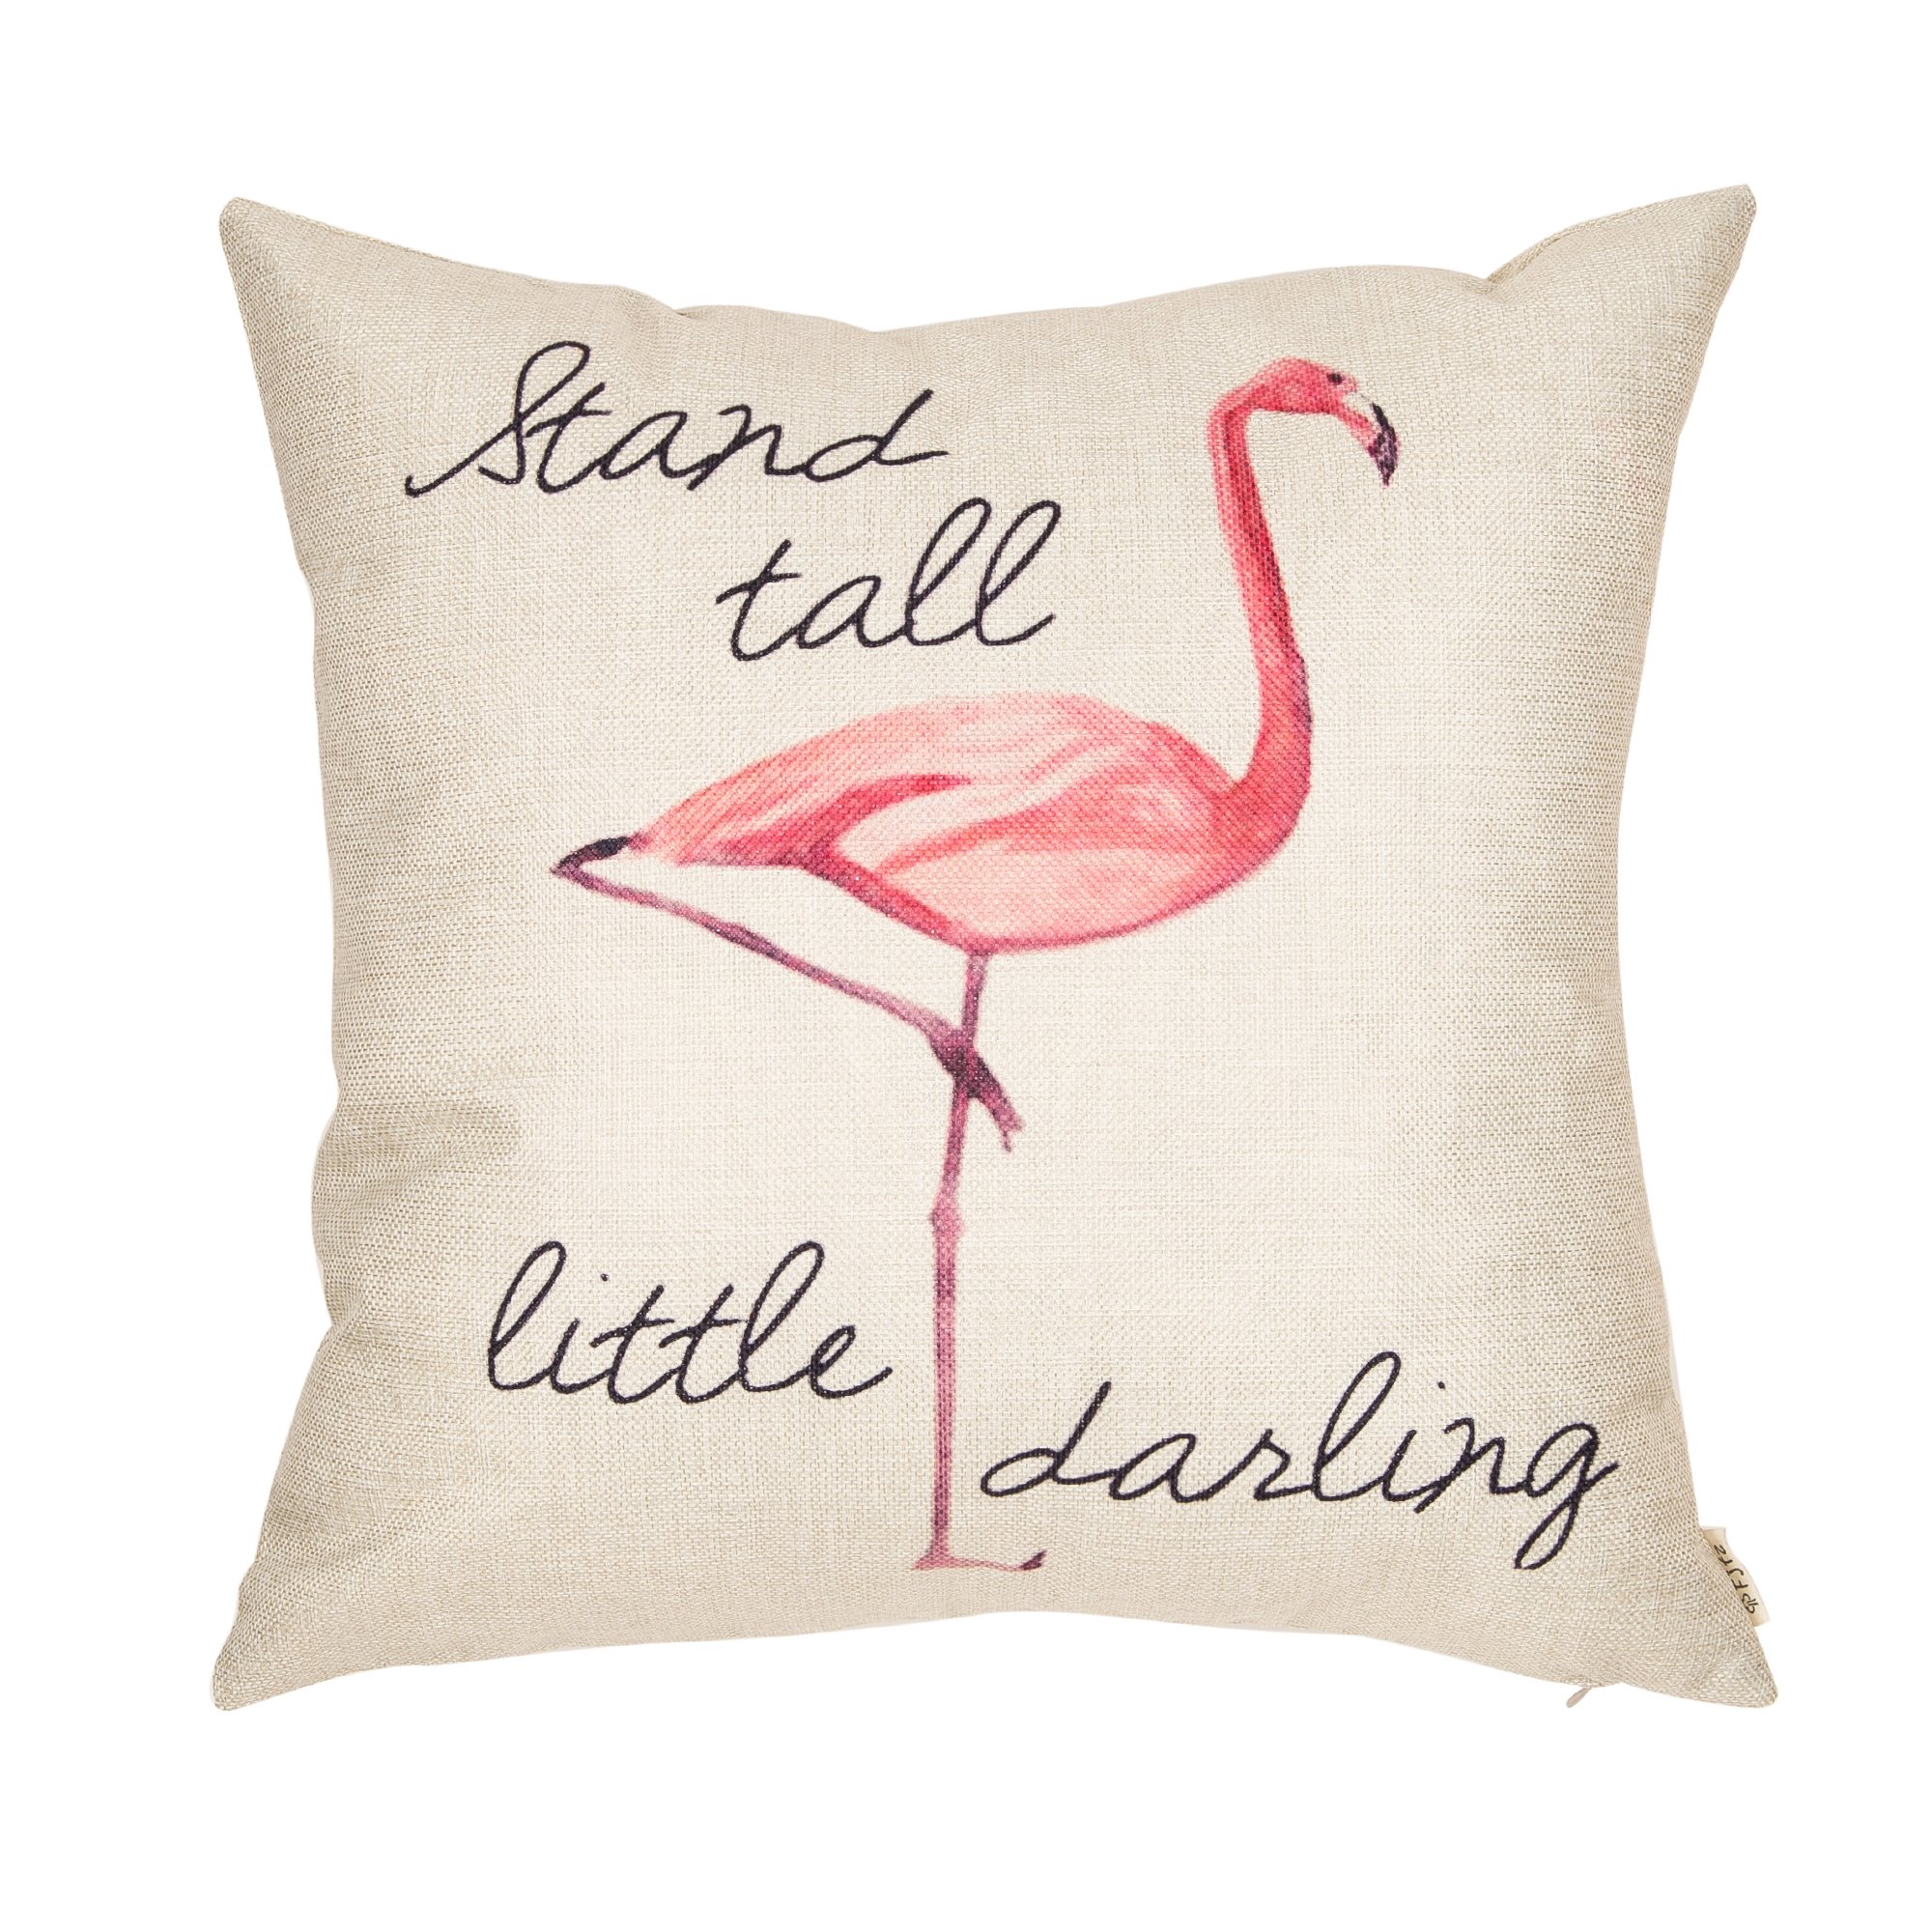 Book Cover Fjfz Stand Tall Little Darling Watercolor Flamingo Motivational Sign Inspirational Quote Cotton Linen Home Decorative Throw Pillow Case Cushion Cover Sofa Couch, 18